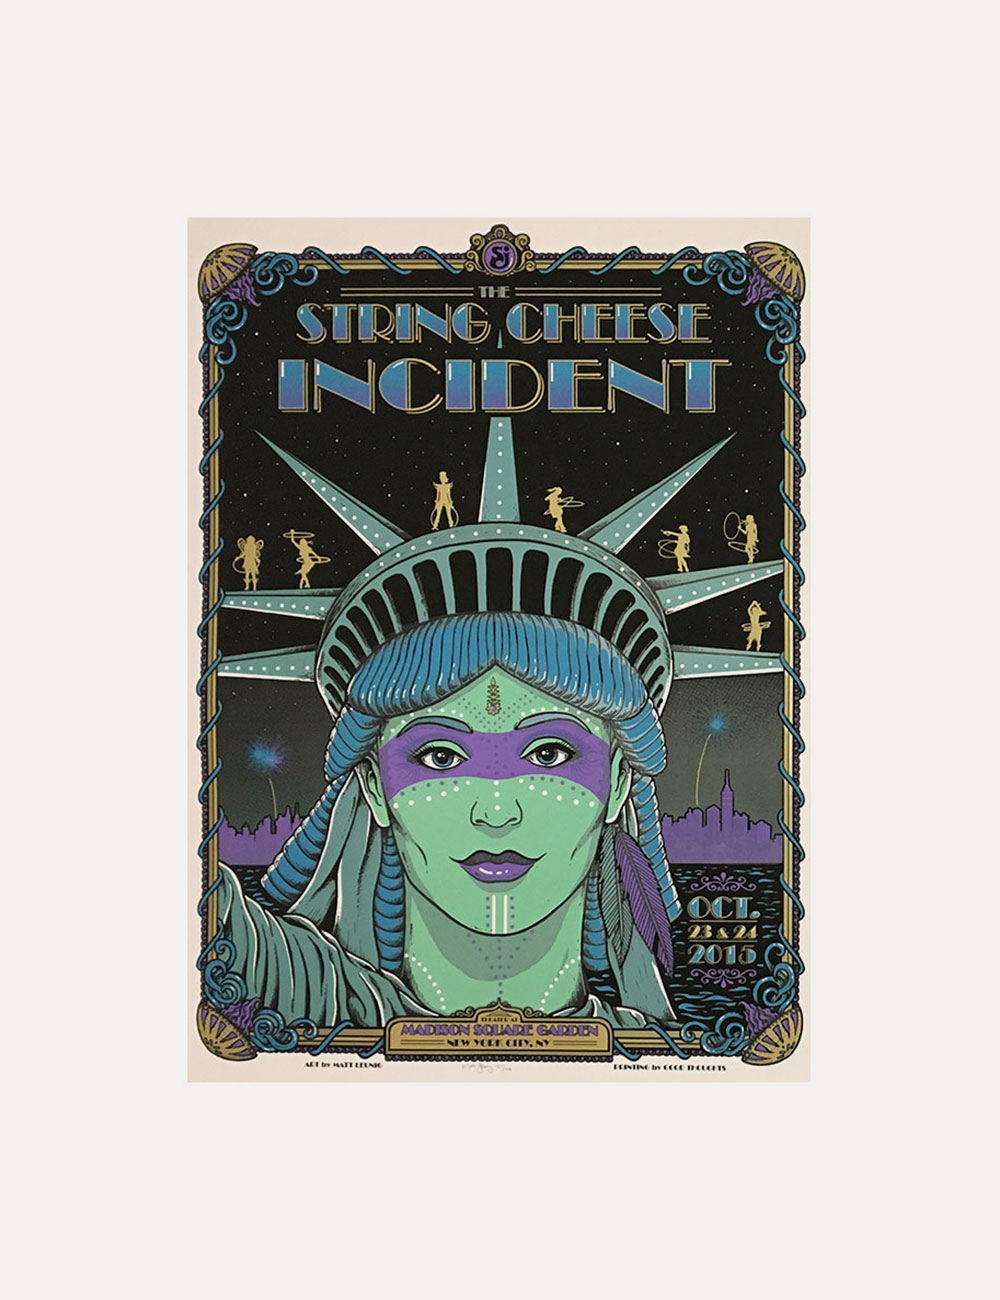 The String Cheese Incident - Merch - Gig Poster - 2015 Madison Square Garden New York City NY Poster